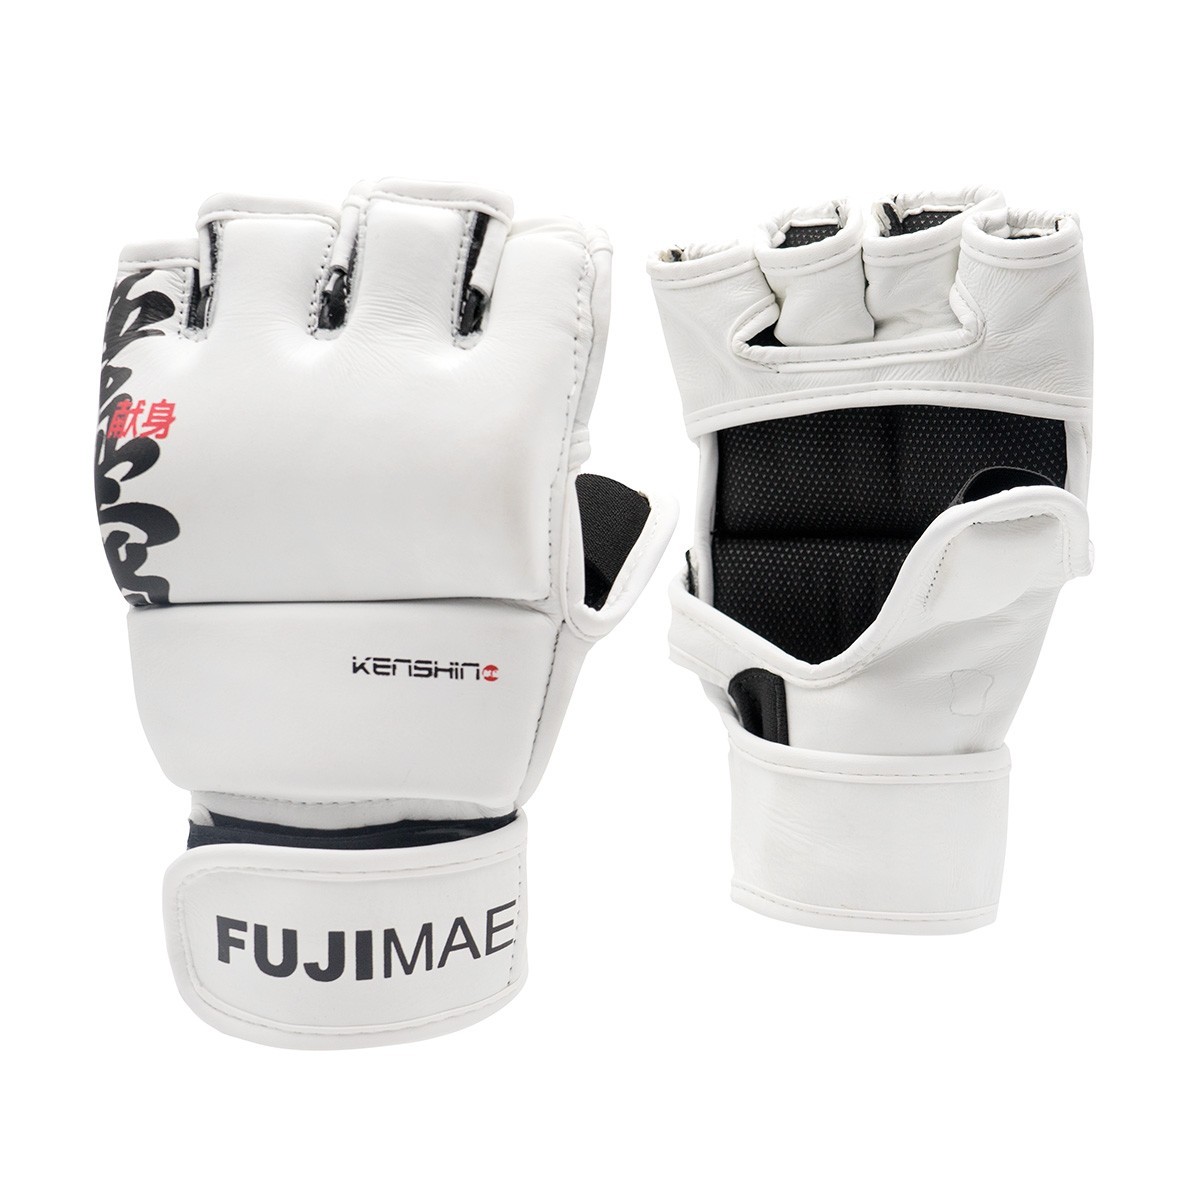 ProSeries QS Gloves Leather MMA Kenshin